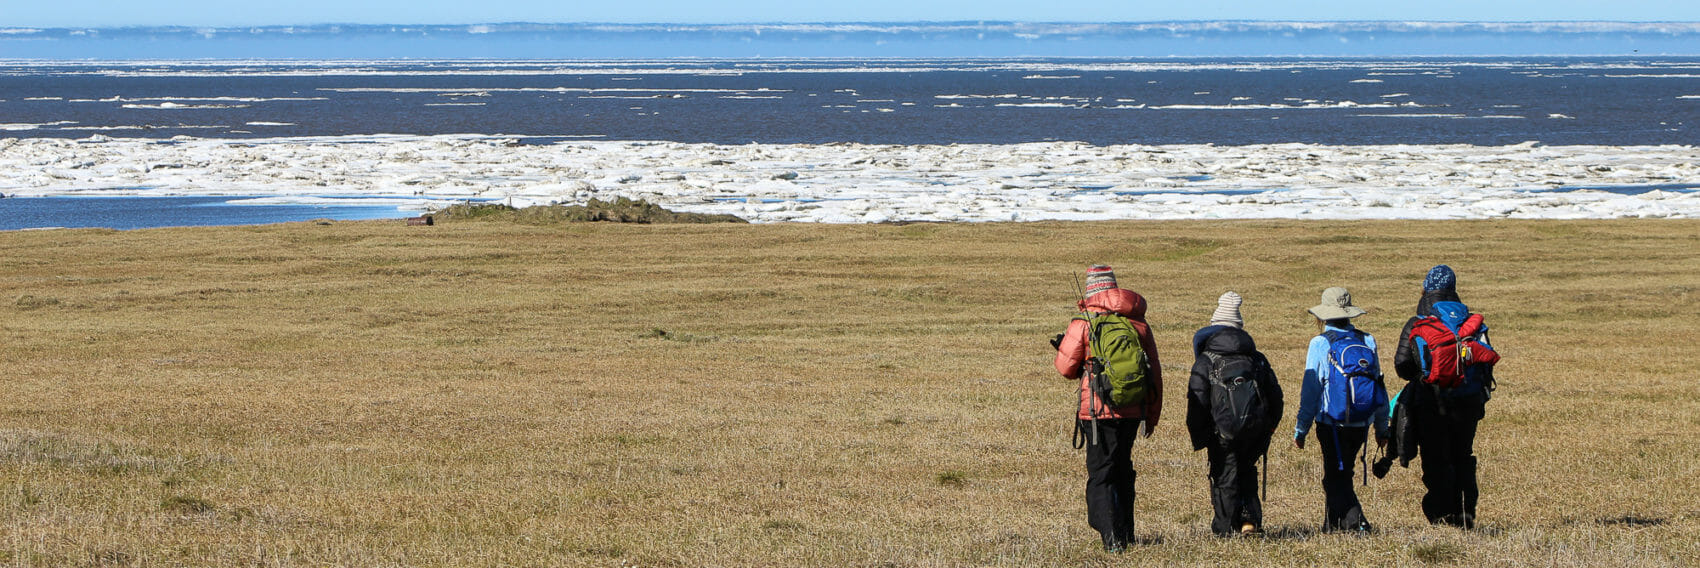 hikers on the coastal plain of the arctic refuge with the frozen beaufort sea in the background